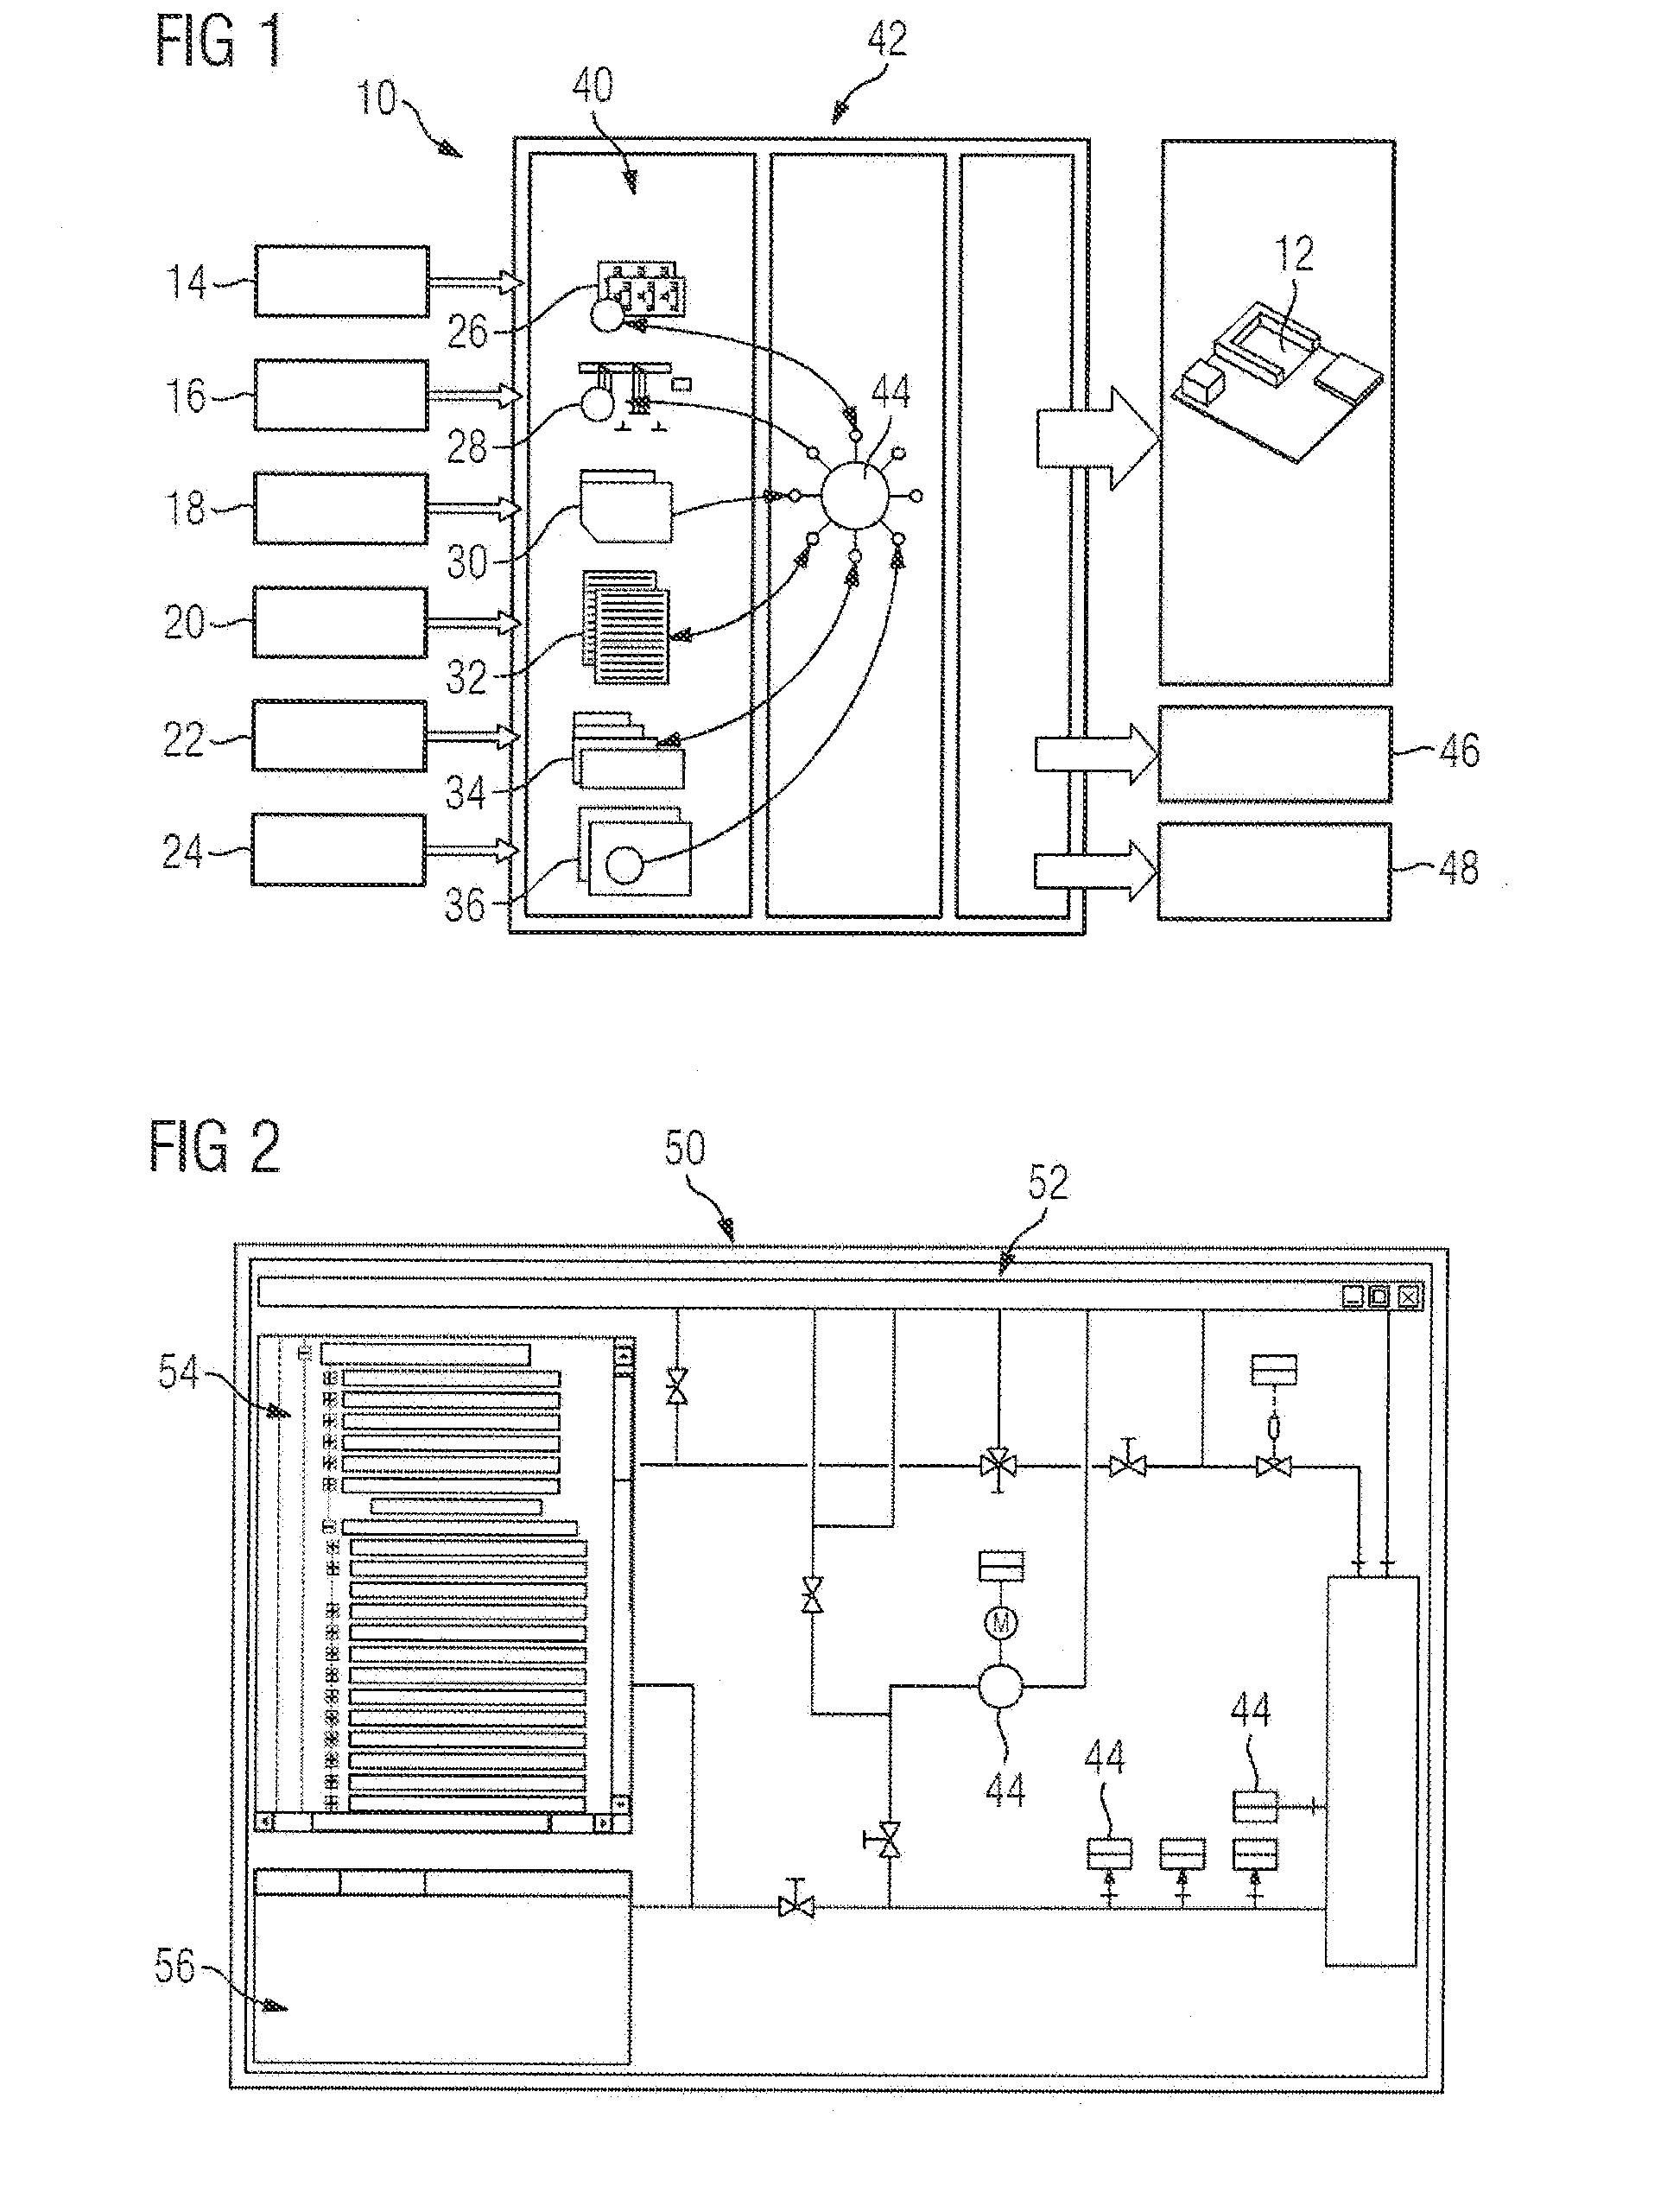 Method for Monitoring a Process and/or Production Plant